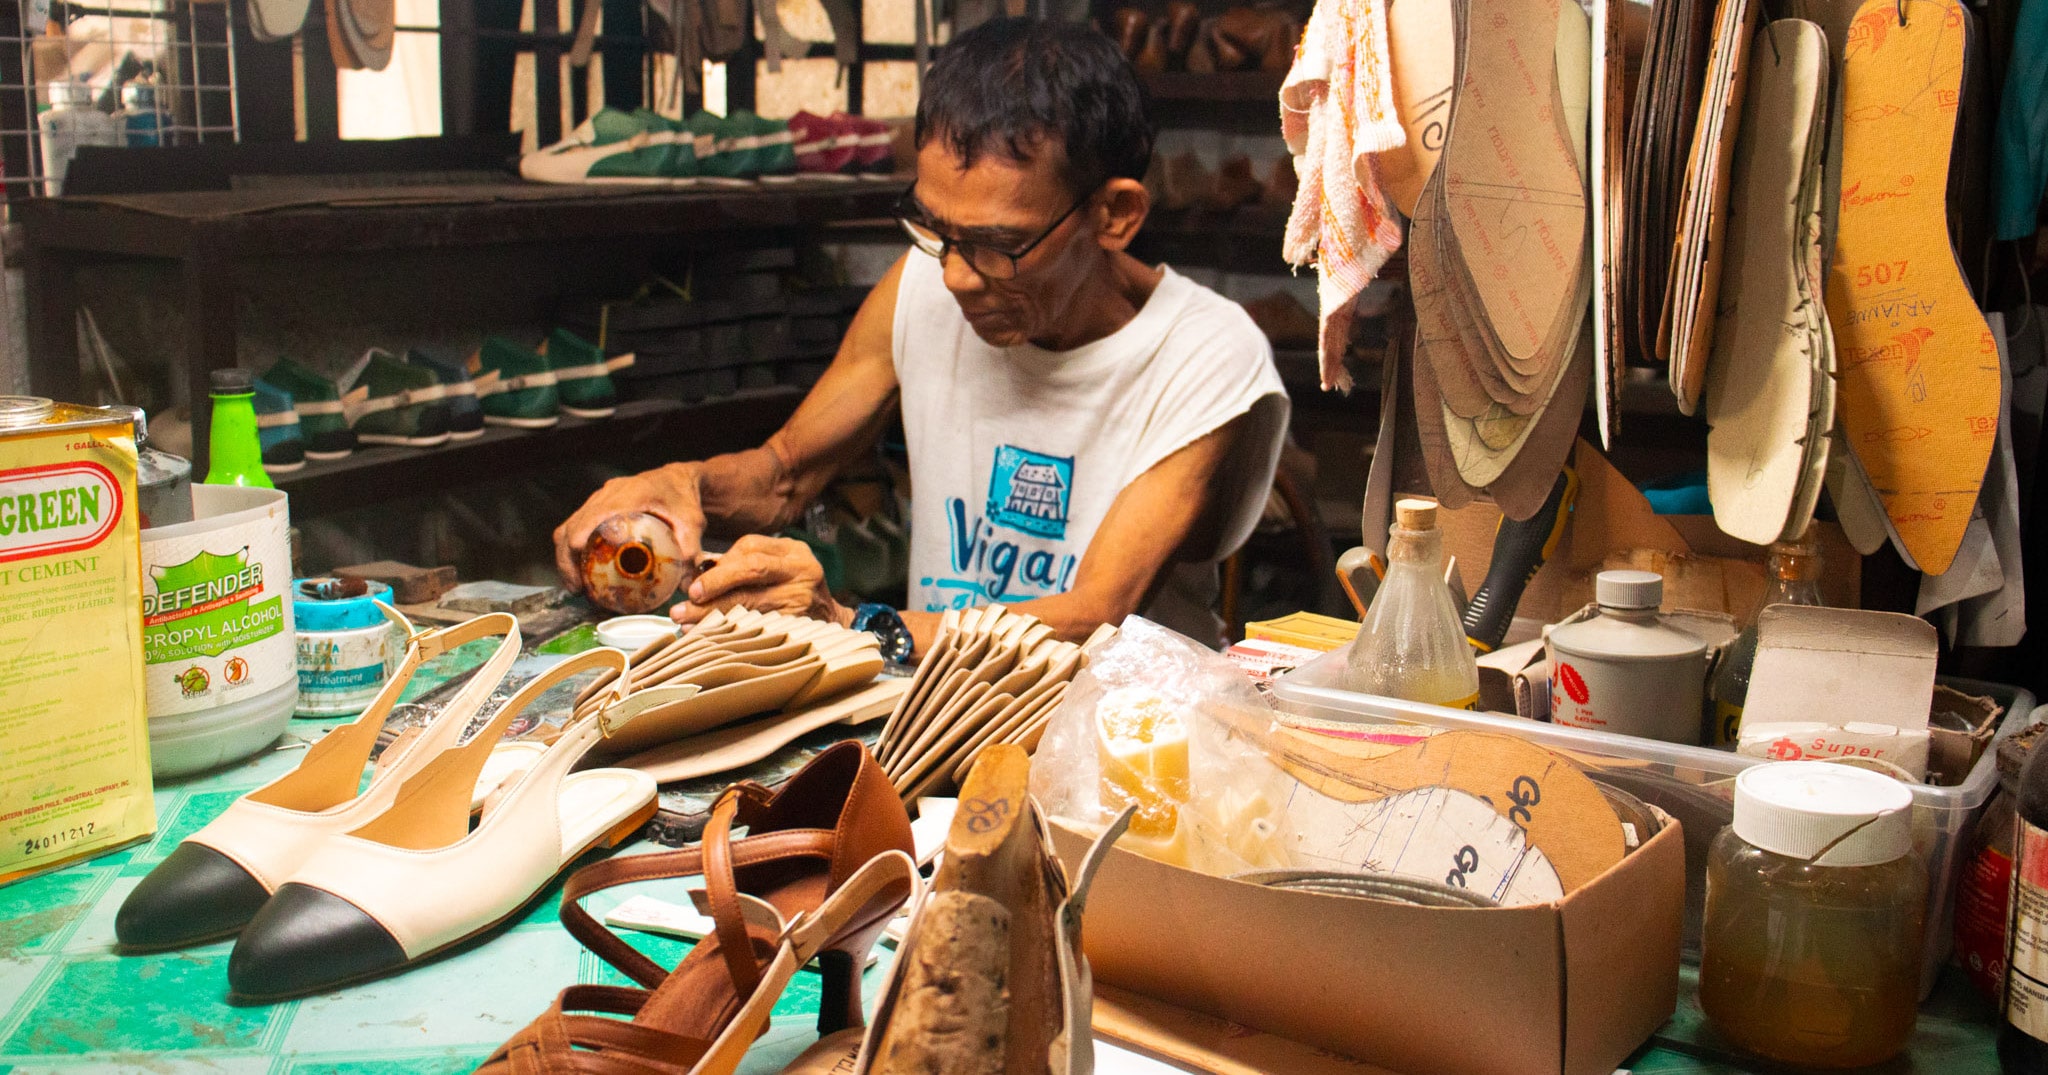 Big shoes to fill: Marikina shoemakers bring back the shine of local footwear